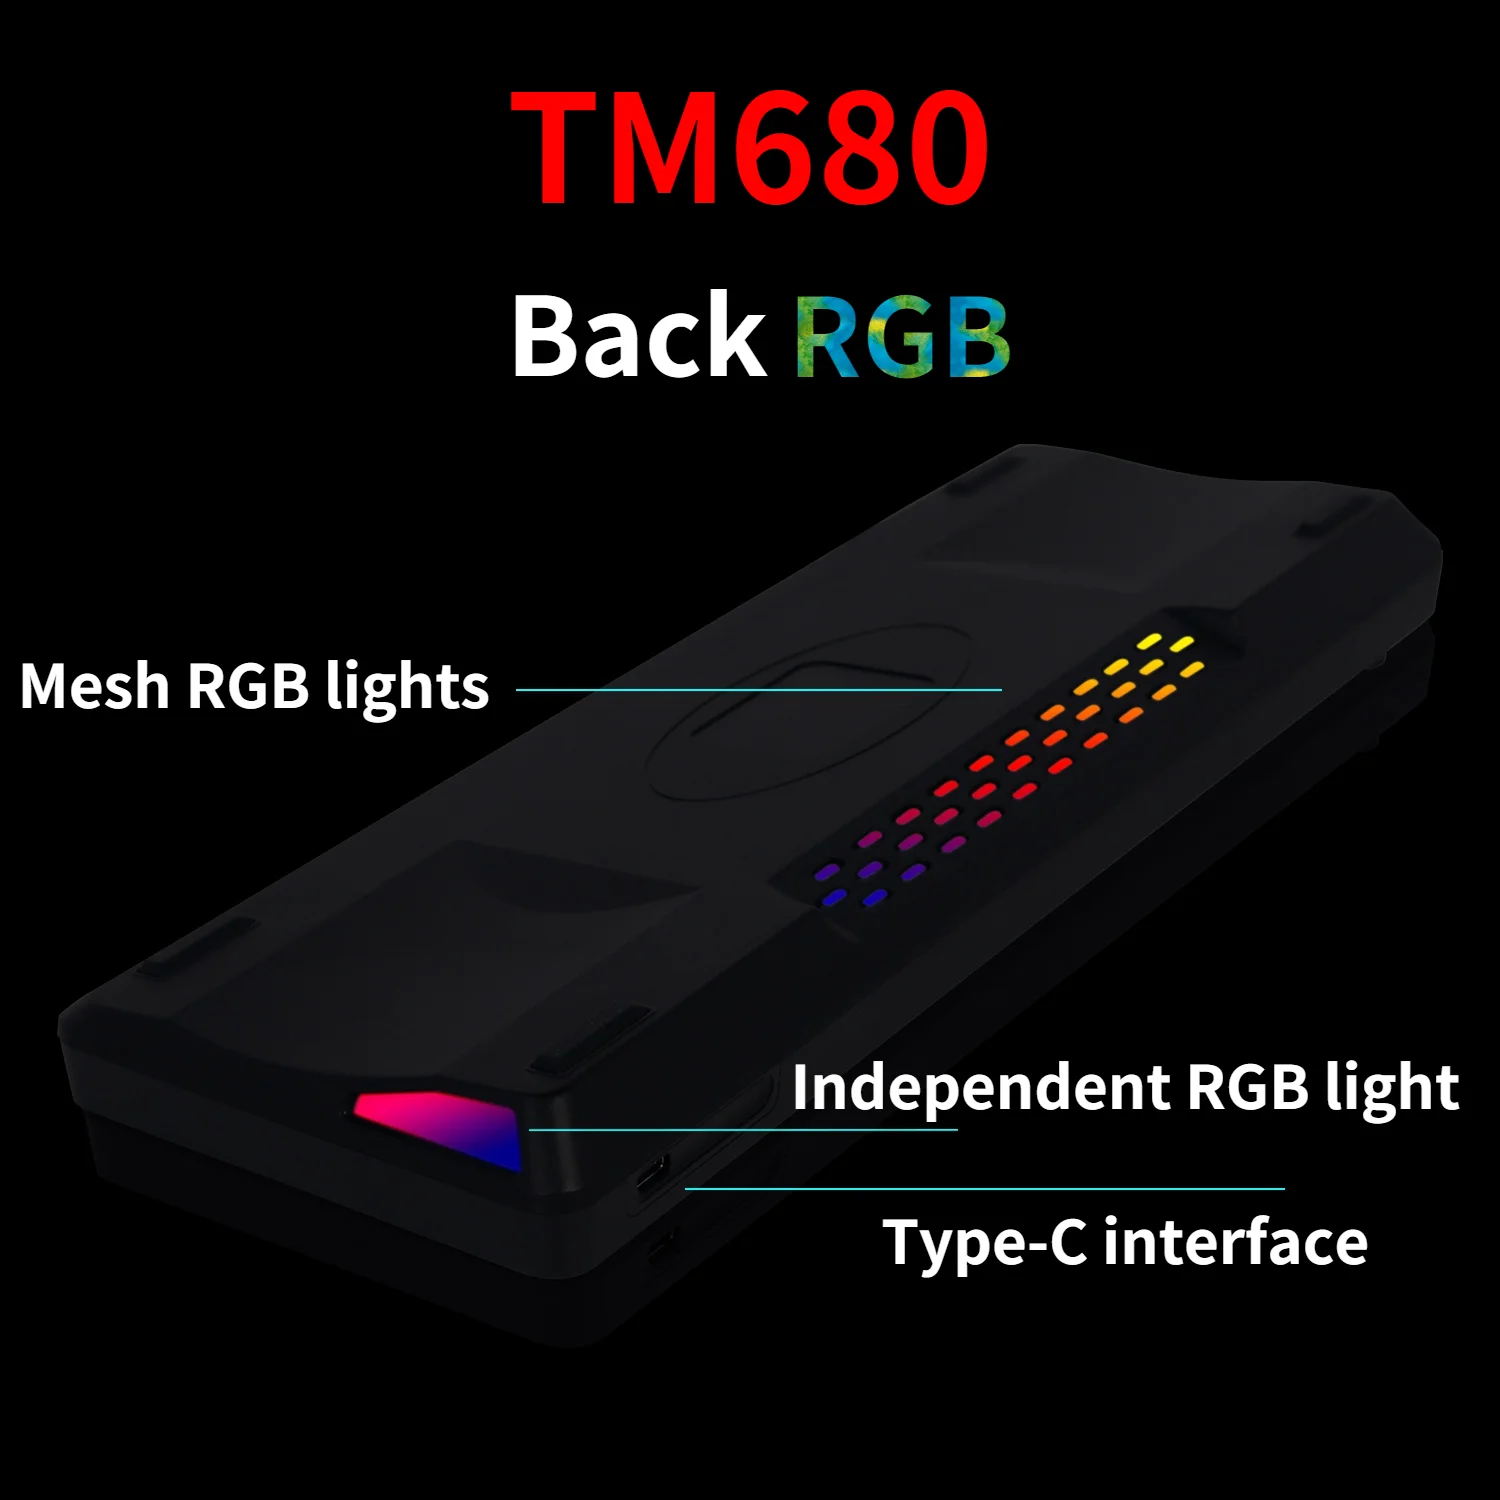 TM680 Hot Swap 3 Mode Mechanical Keyboard DIY Kit Wired RGB Light Compatiable with 3/5 Pins for Cherry MX Gateron Kailh Switches enlarge